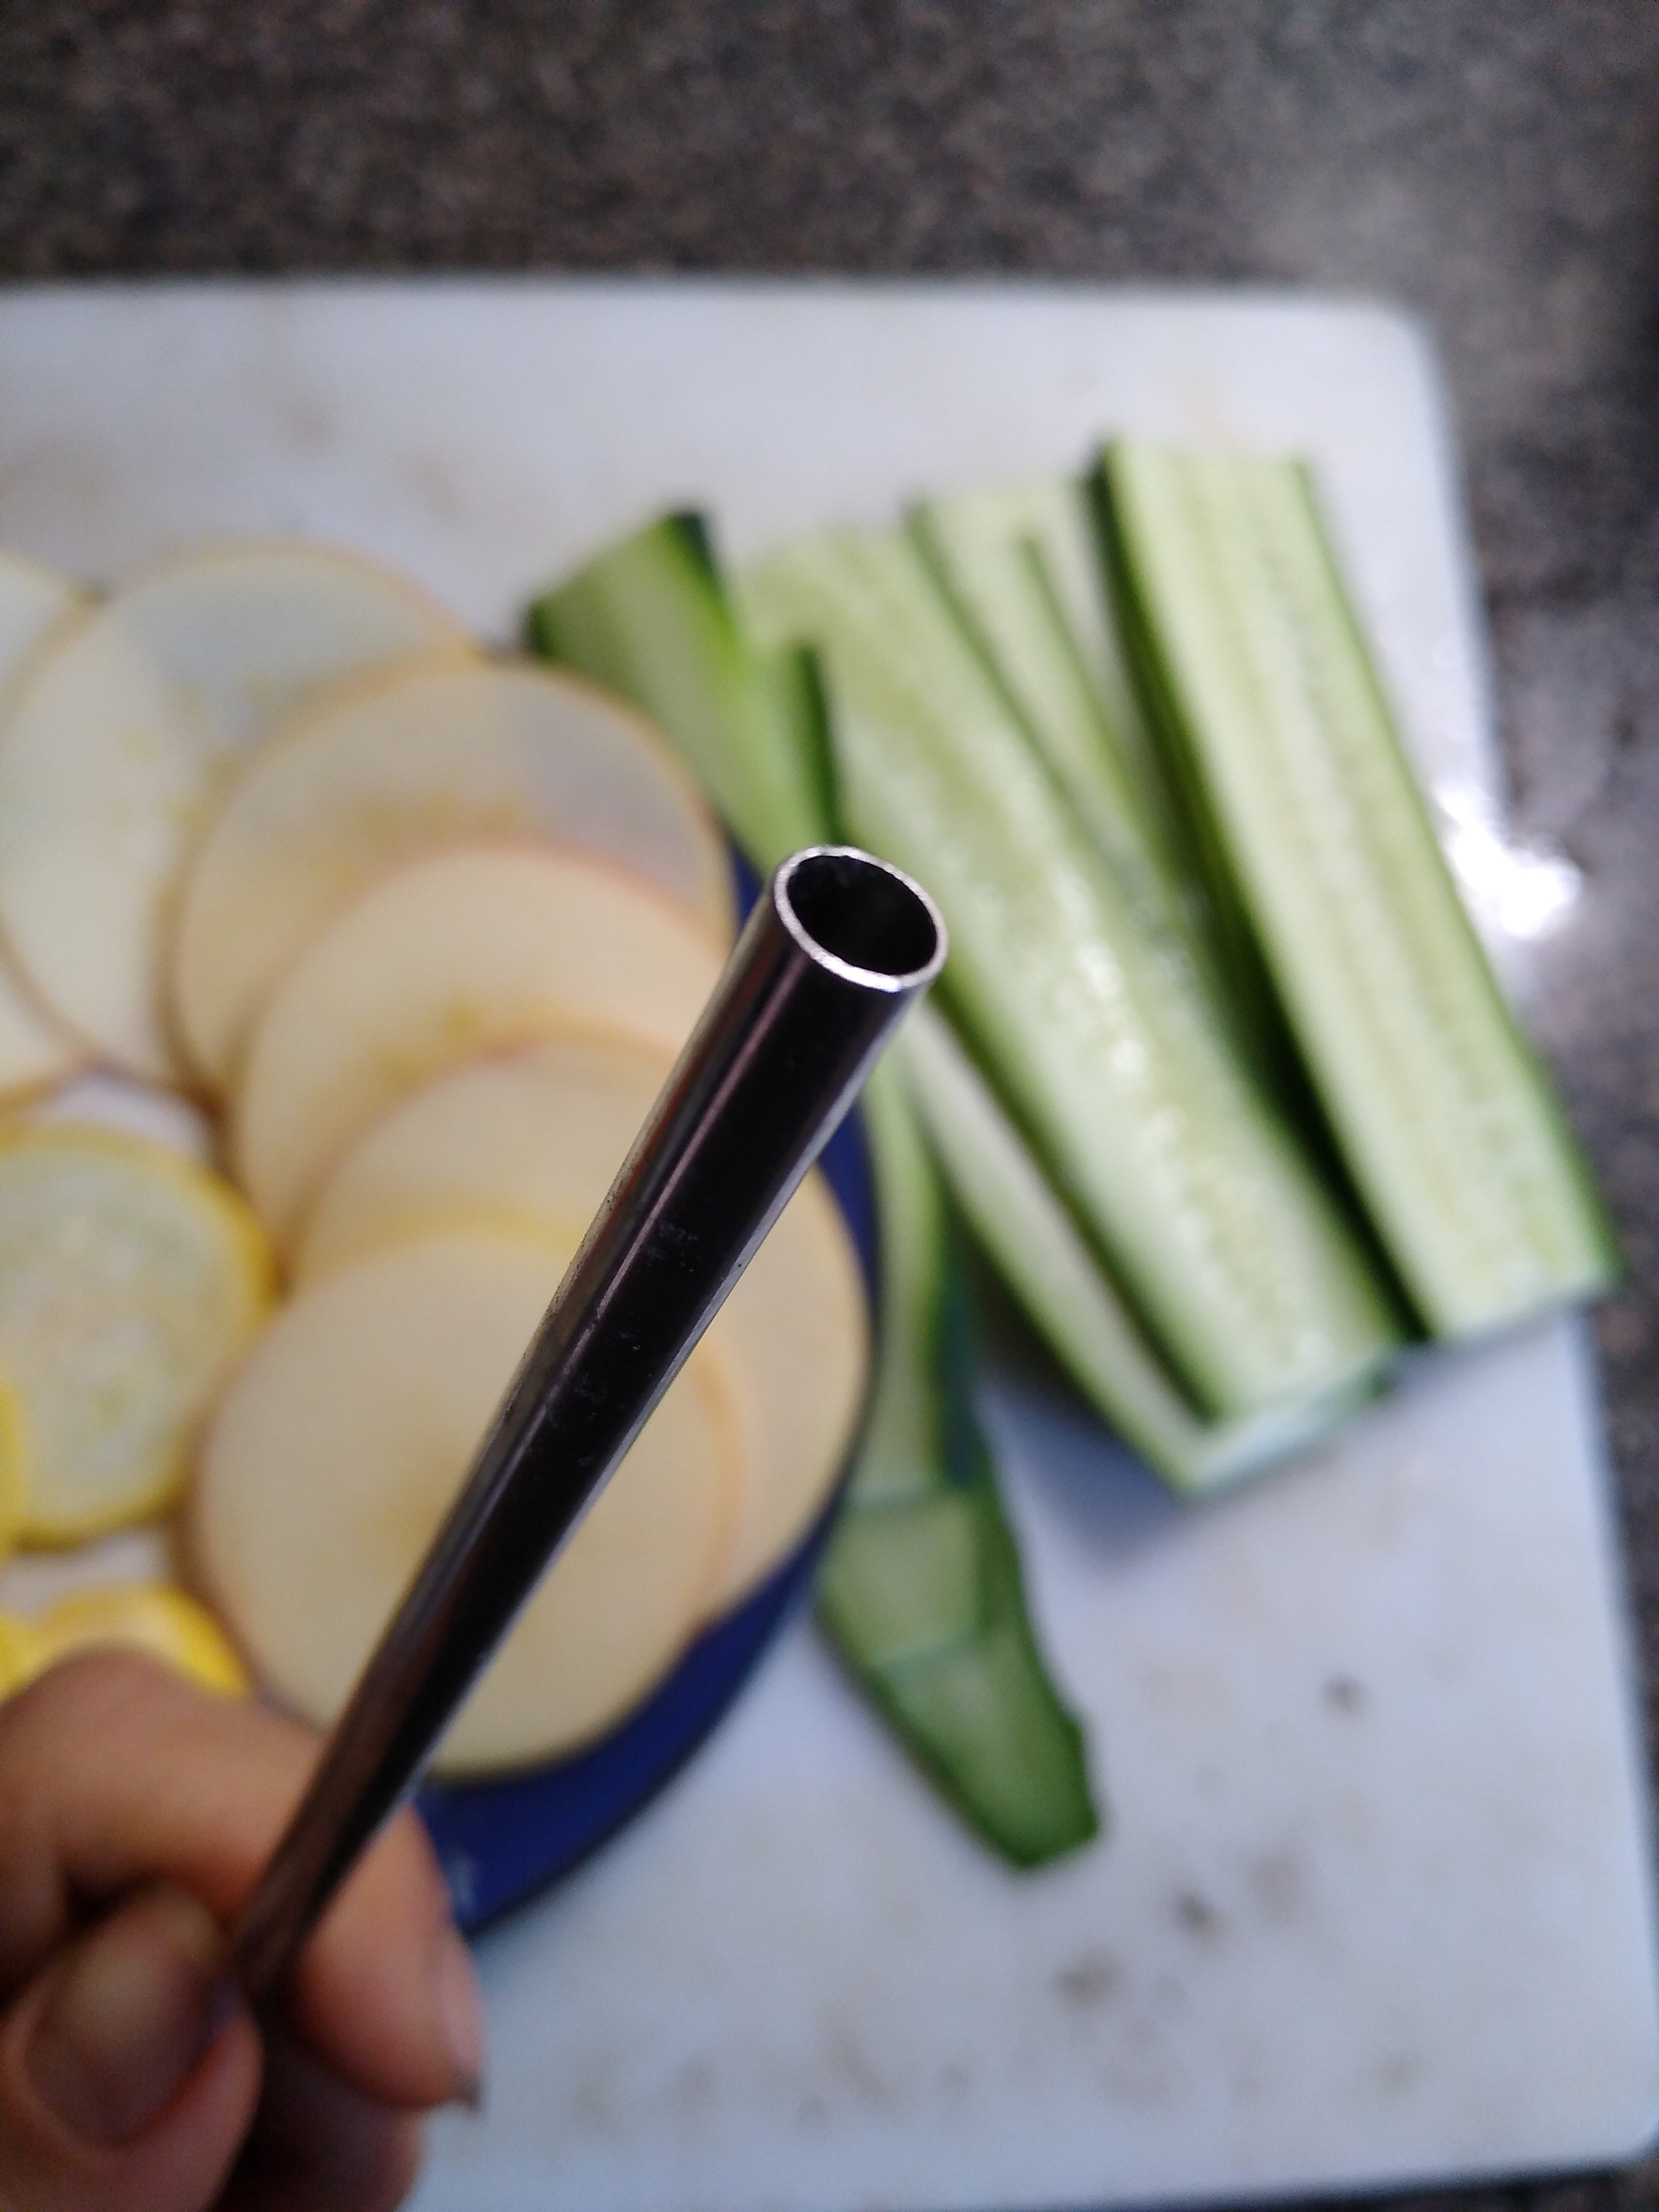 Close up of end of stainless steel straw. In background, cucumber and apple slices.